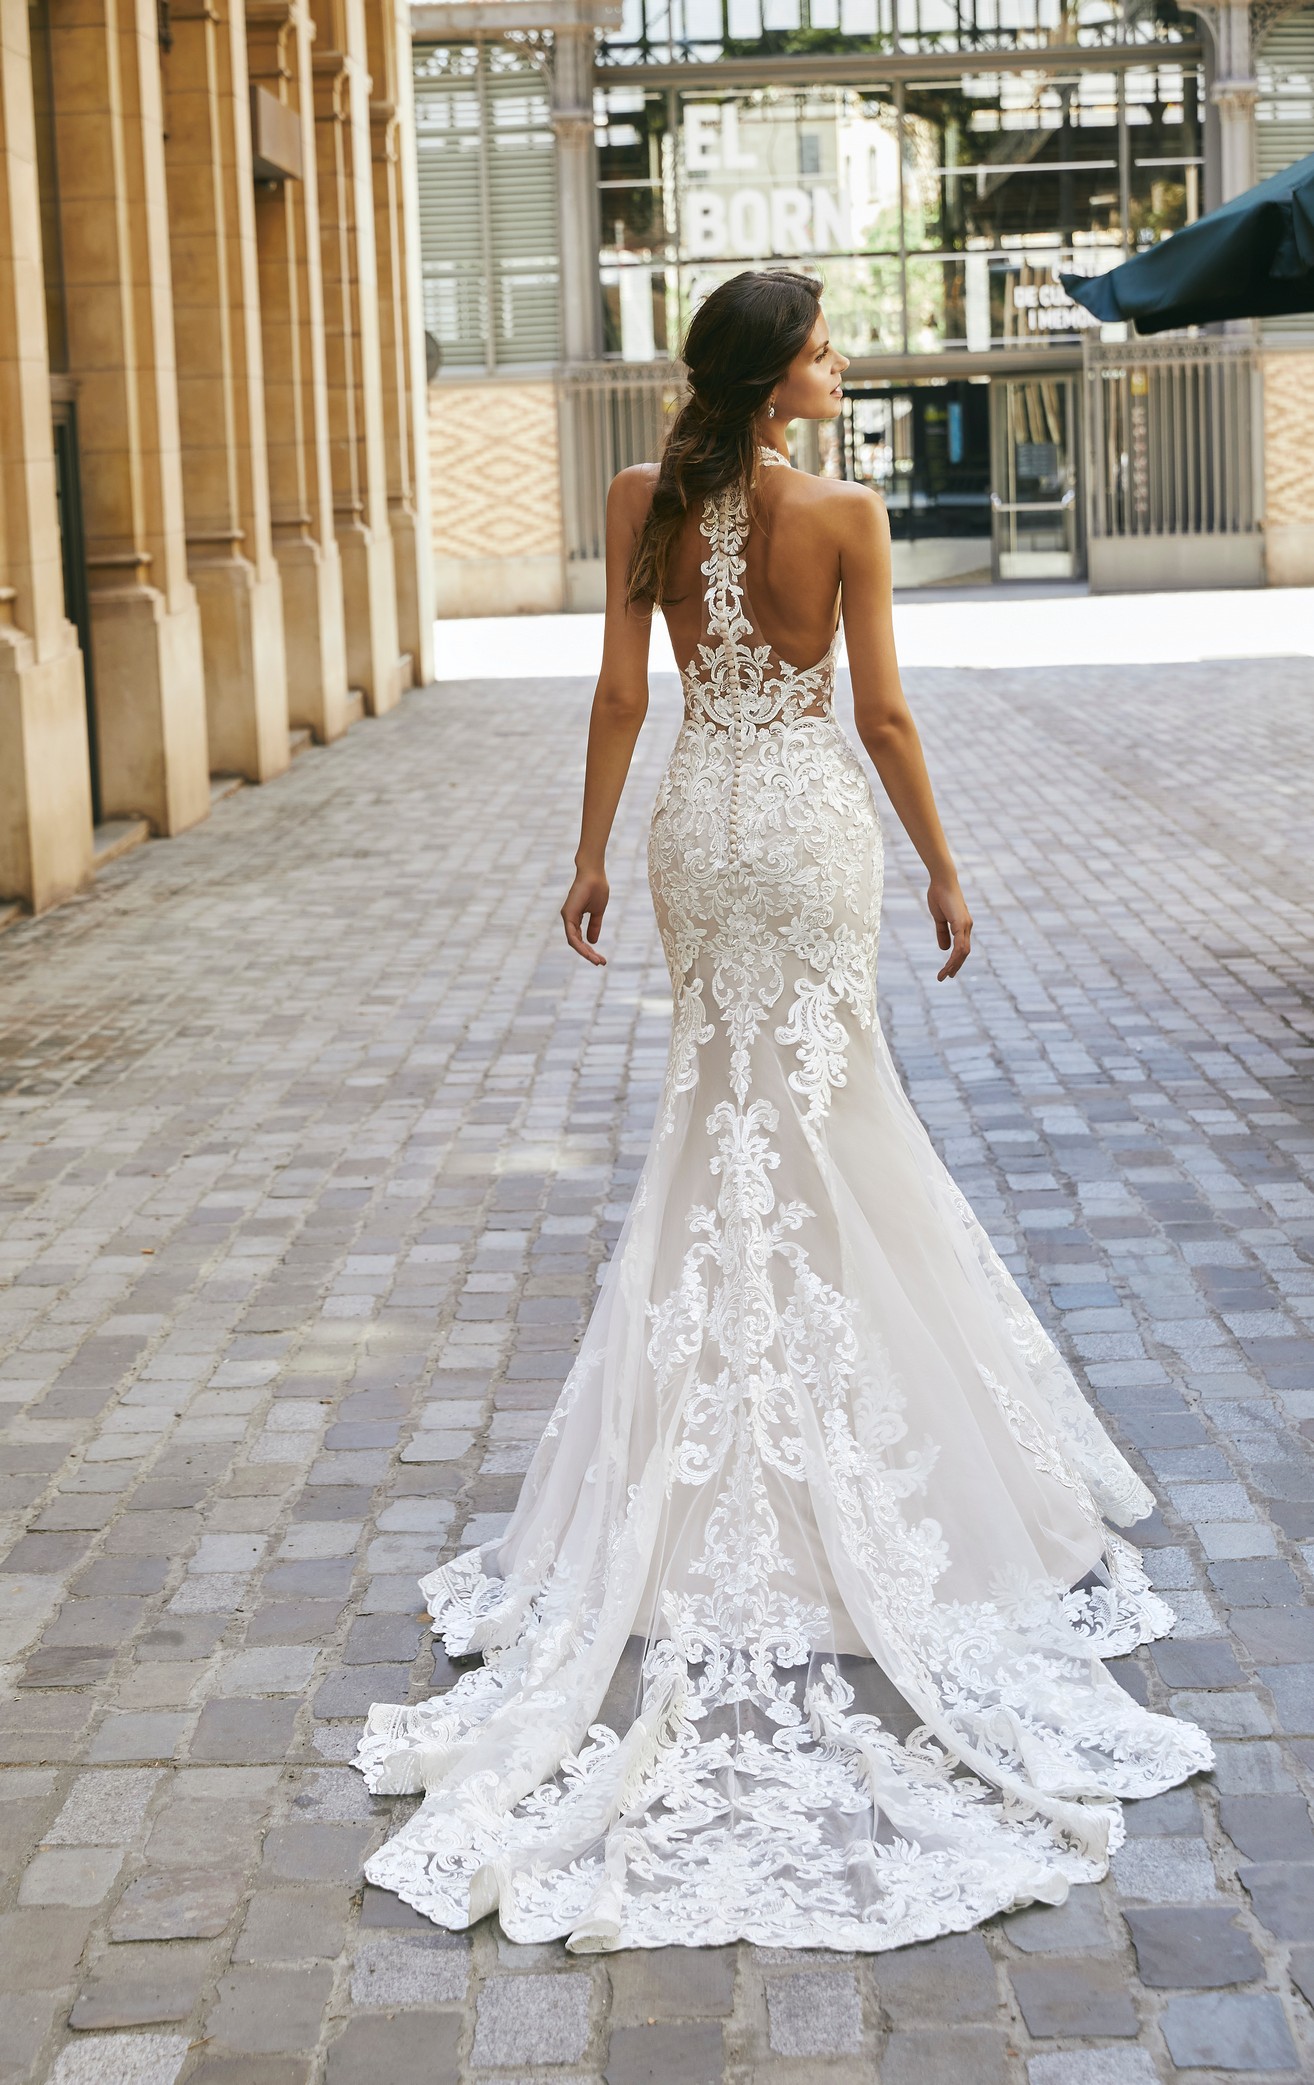 Lady walking in Barcelona neighbourhood wearing fitted fishtail lace and tulle wedding dress with illusion back detail